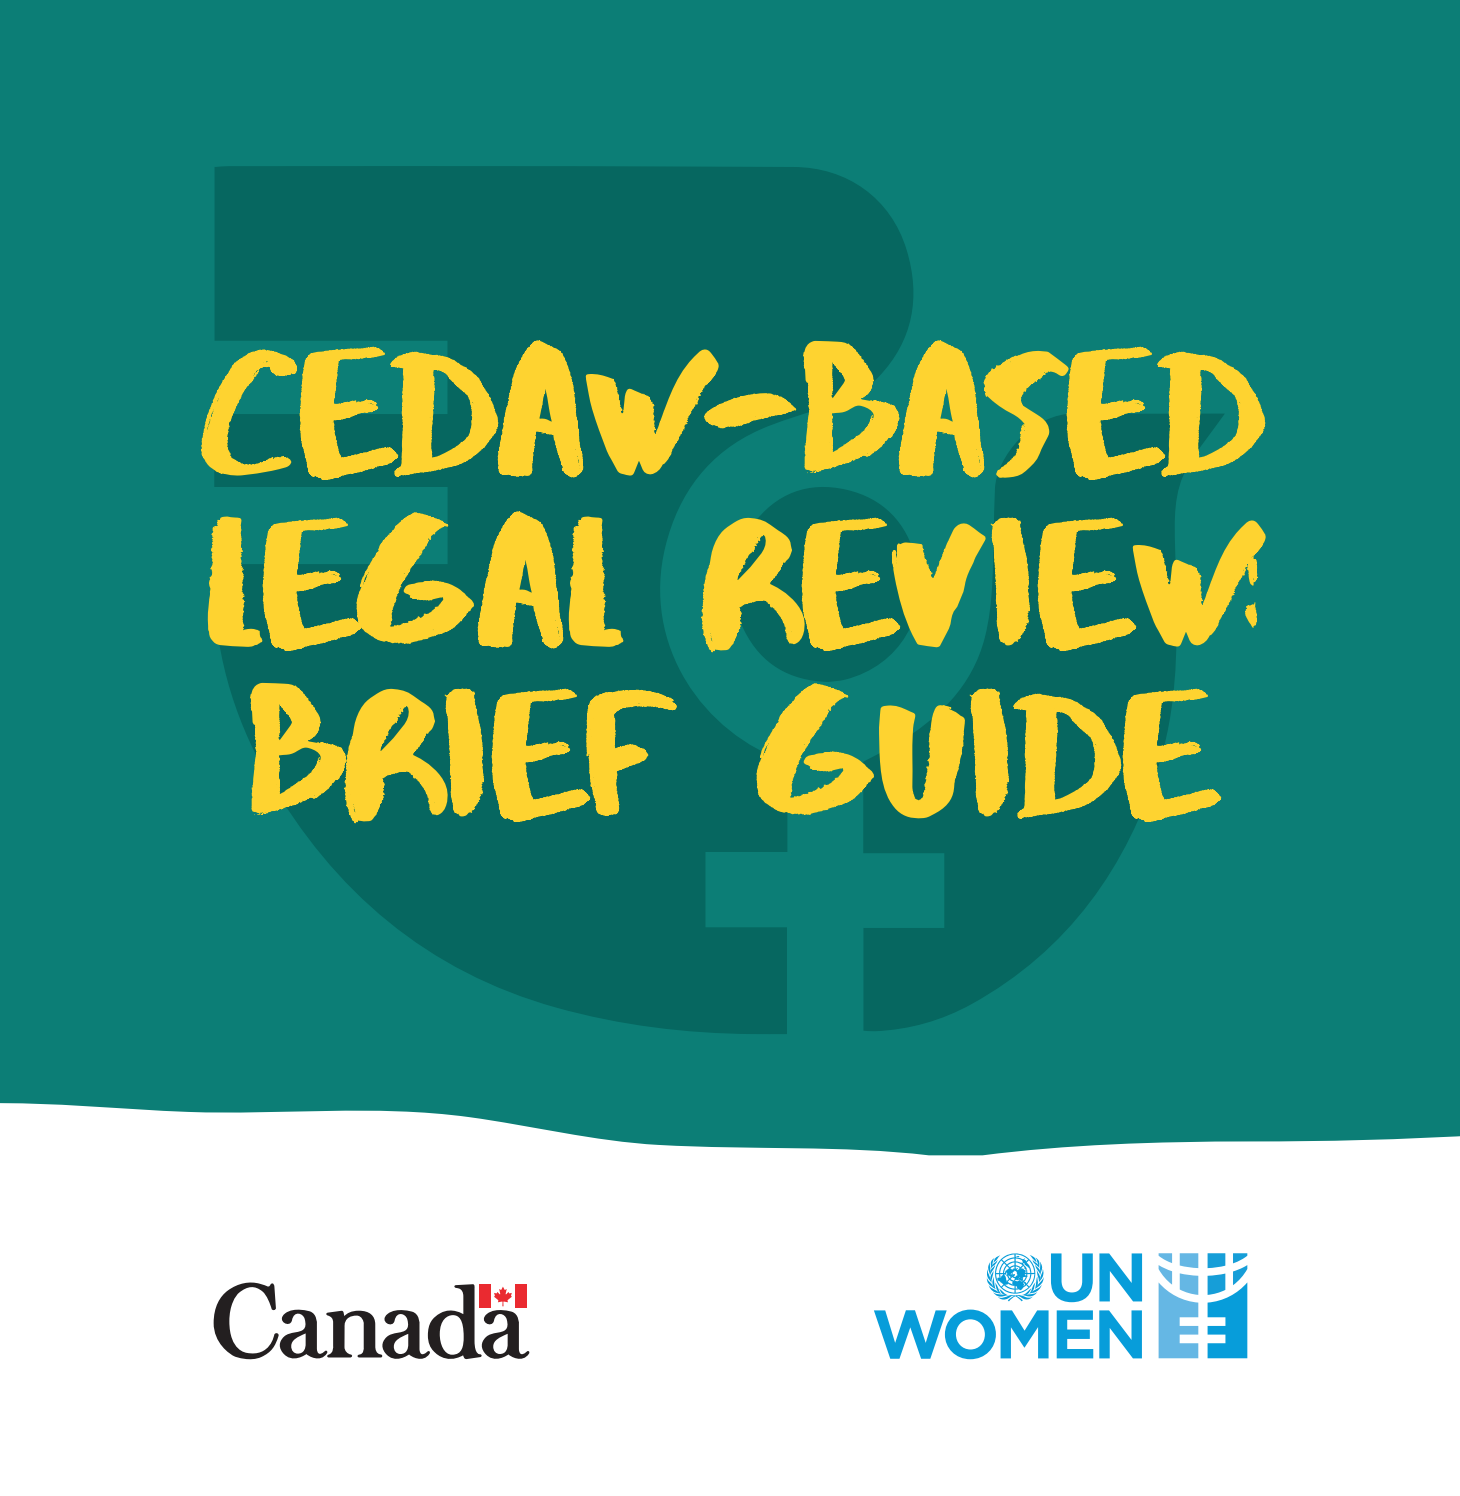 The CEDAW-based Legal Review: A Brief Guide